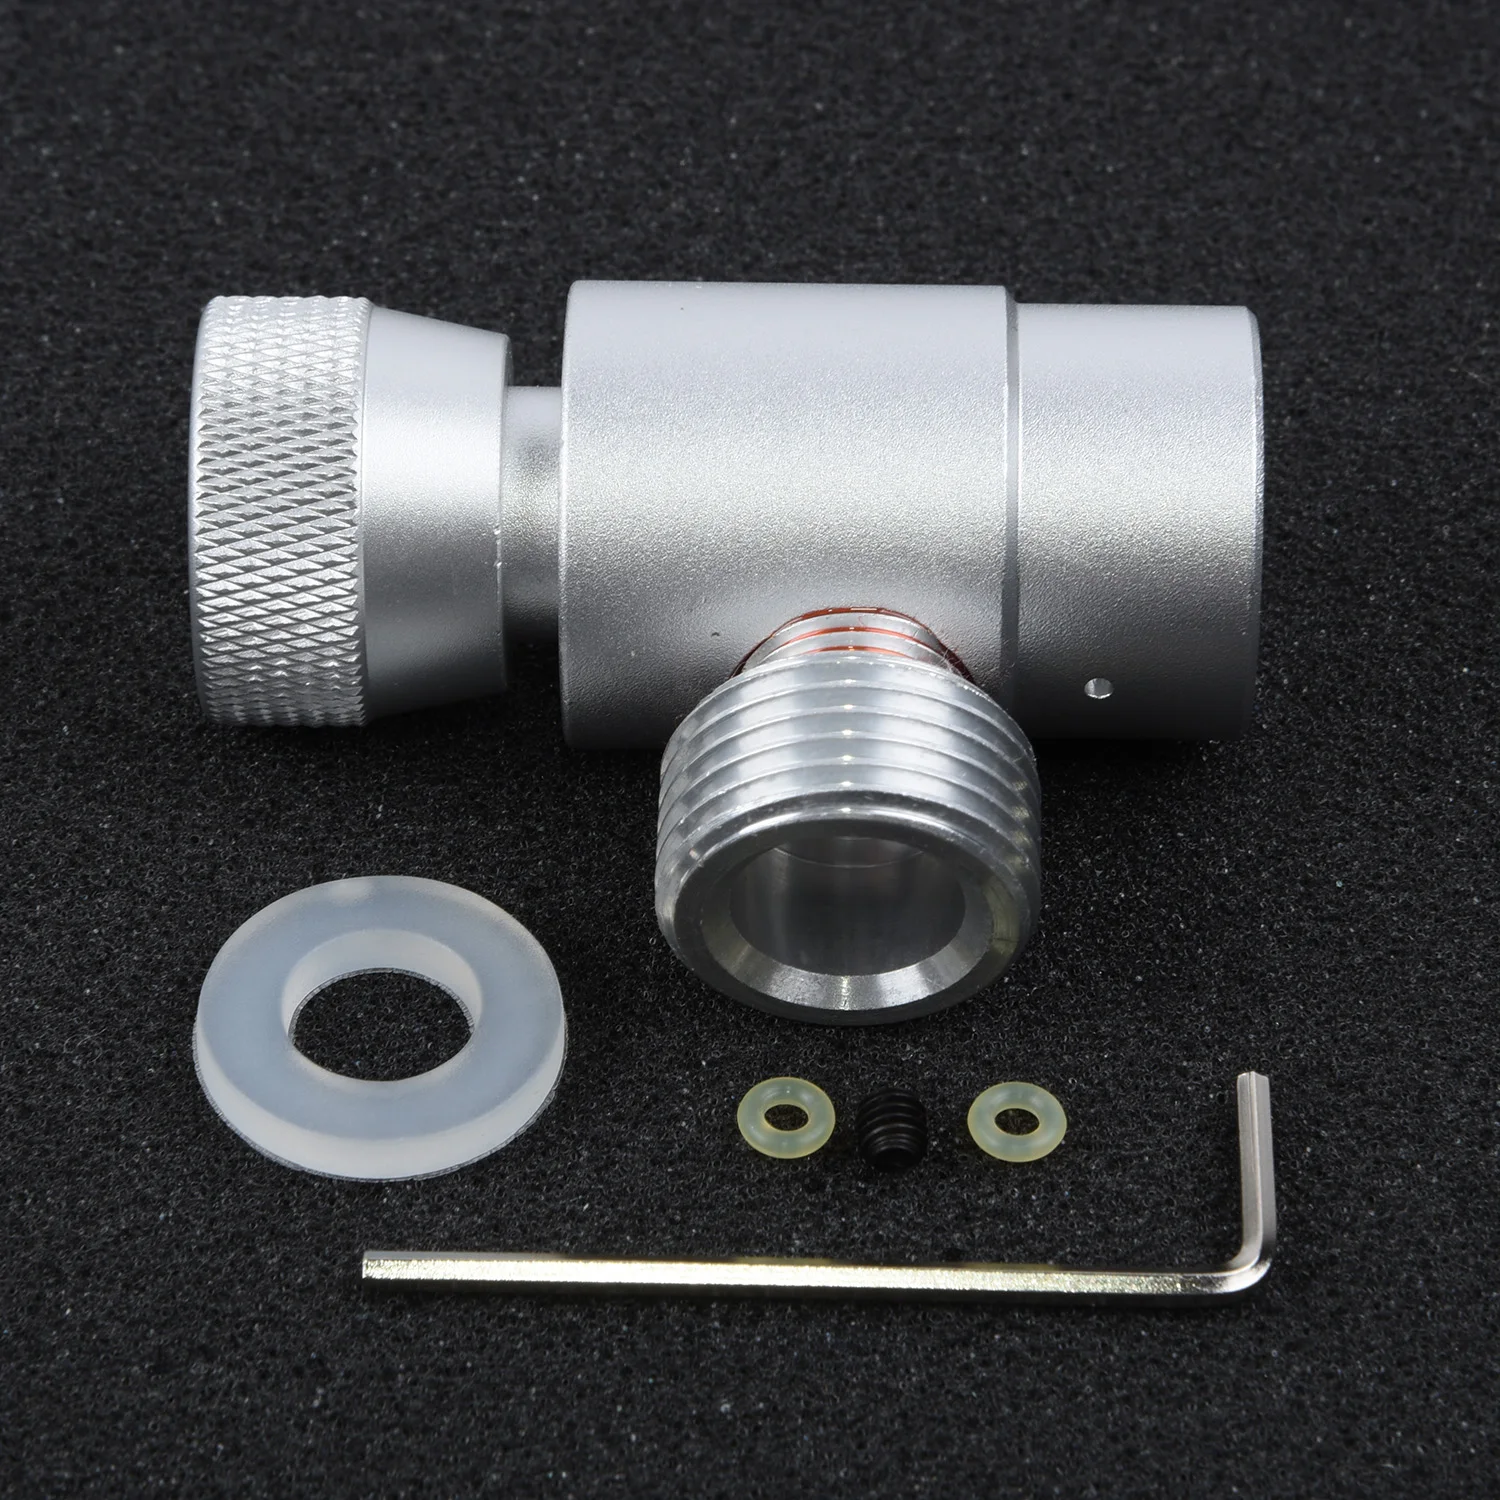 

Metal CO2 Gas Filling Refill Adapter Connector Kit Thread TR21-4/W21.8-14 For Sodastream Soda Tank- Silver